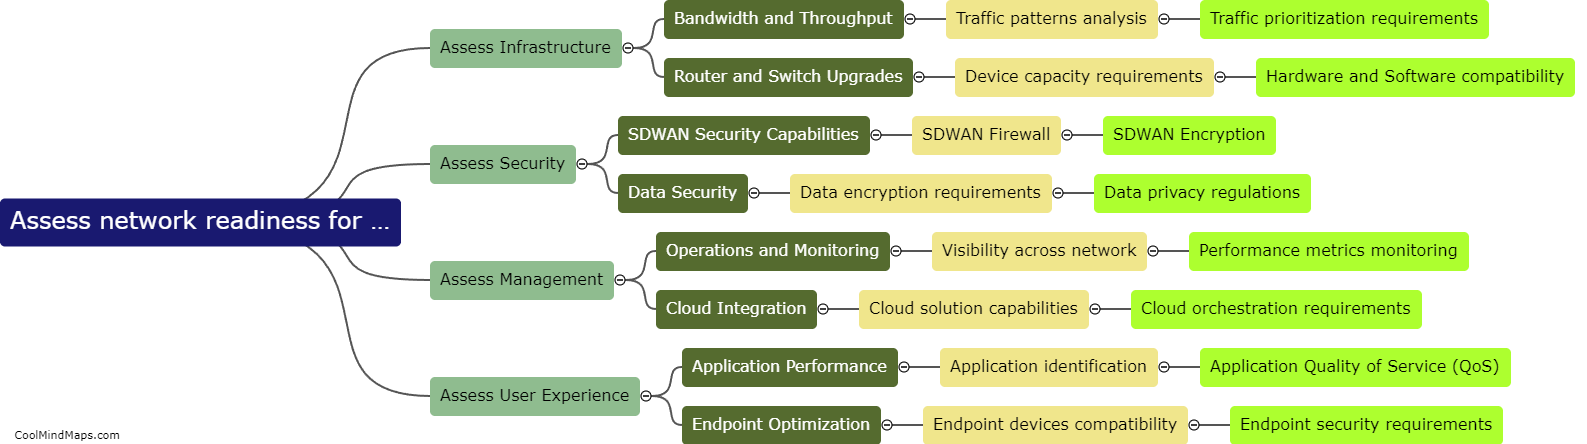 How to assess network readiness for SDWAN?